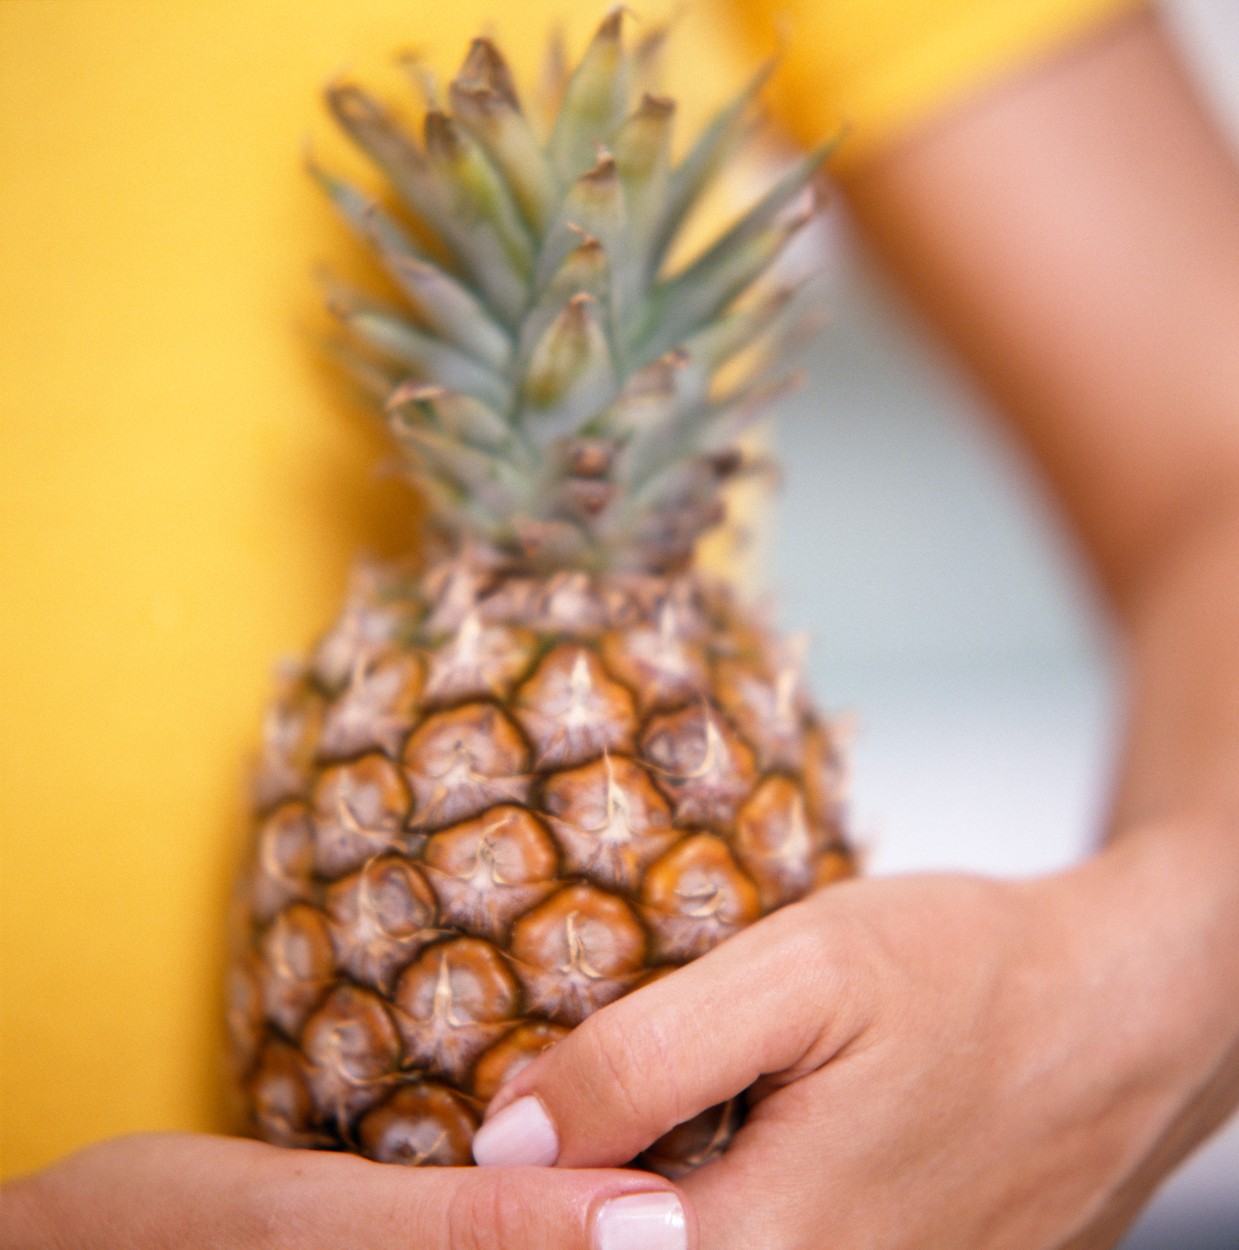 Pineapple. Woman holding a fresh pineapple (Ananas sp.). Pineapples are a good source of dietary fibre and vitamin C.,Image: 102261099, License: Rights-managed, Restrictions: , Model Release: no, Credit line: Science Photo Library / Sciencephoto / Profimedia